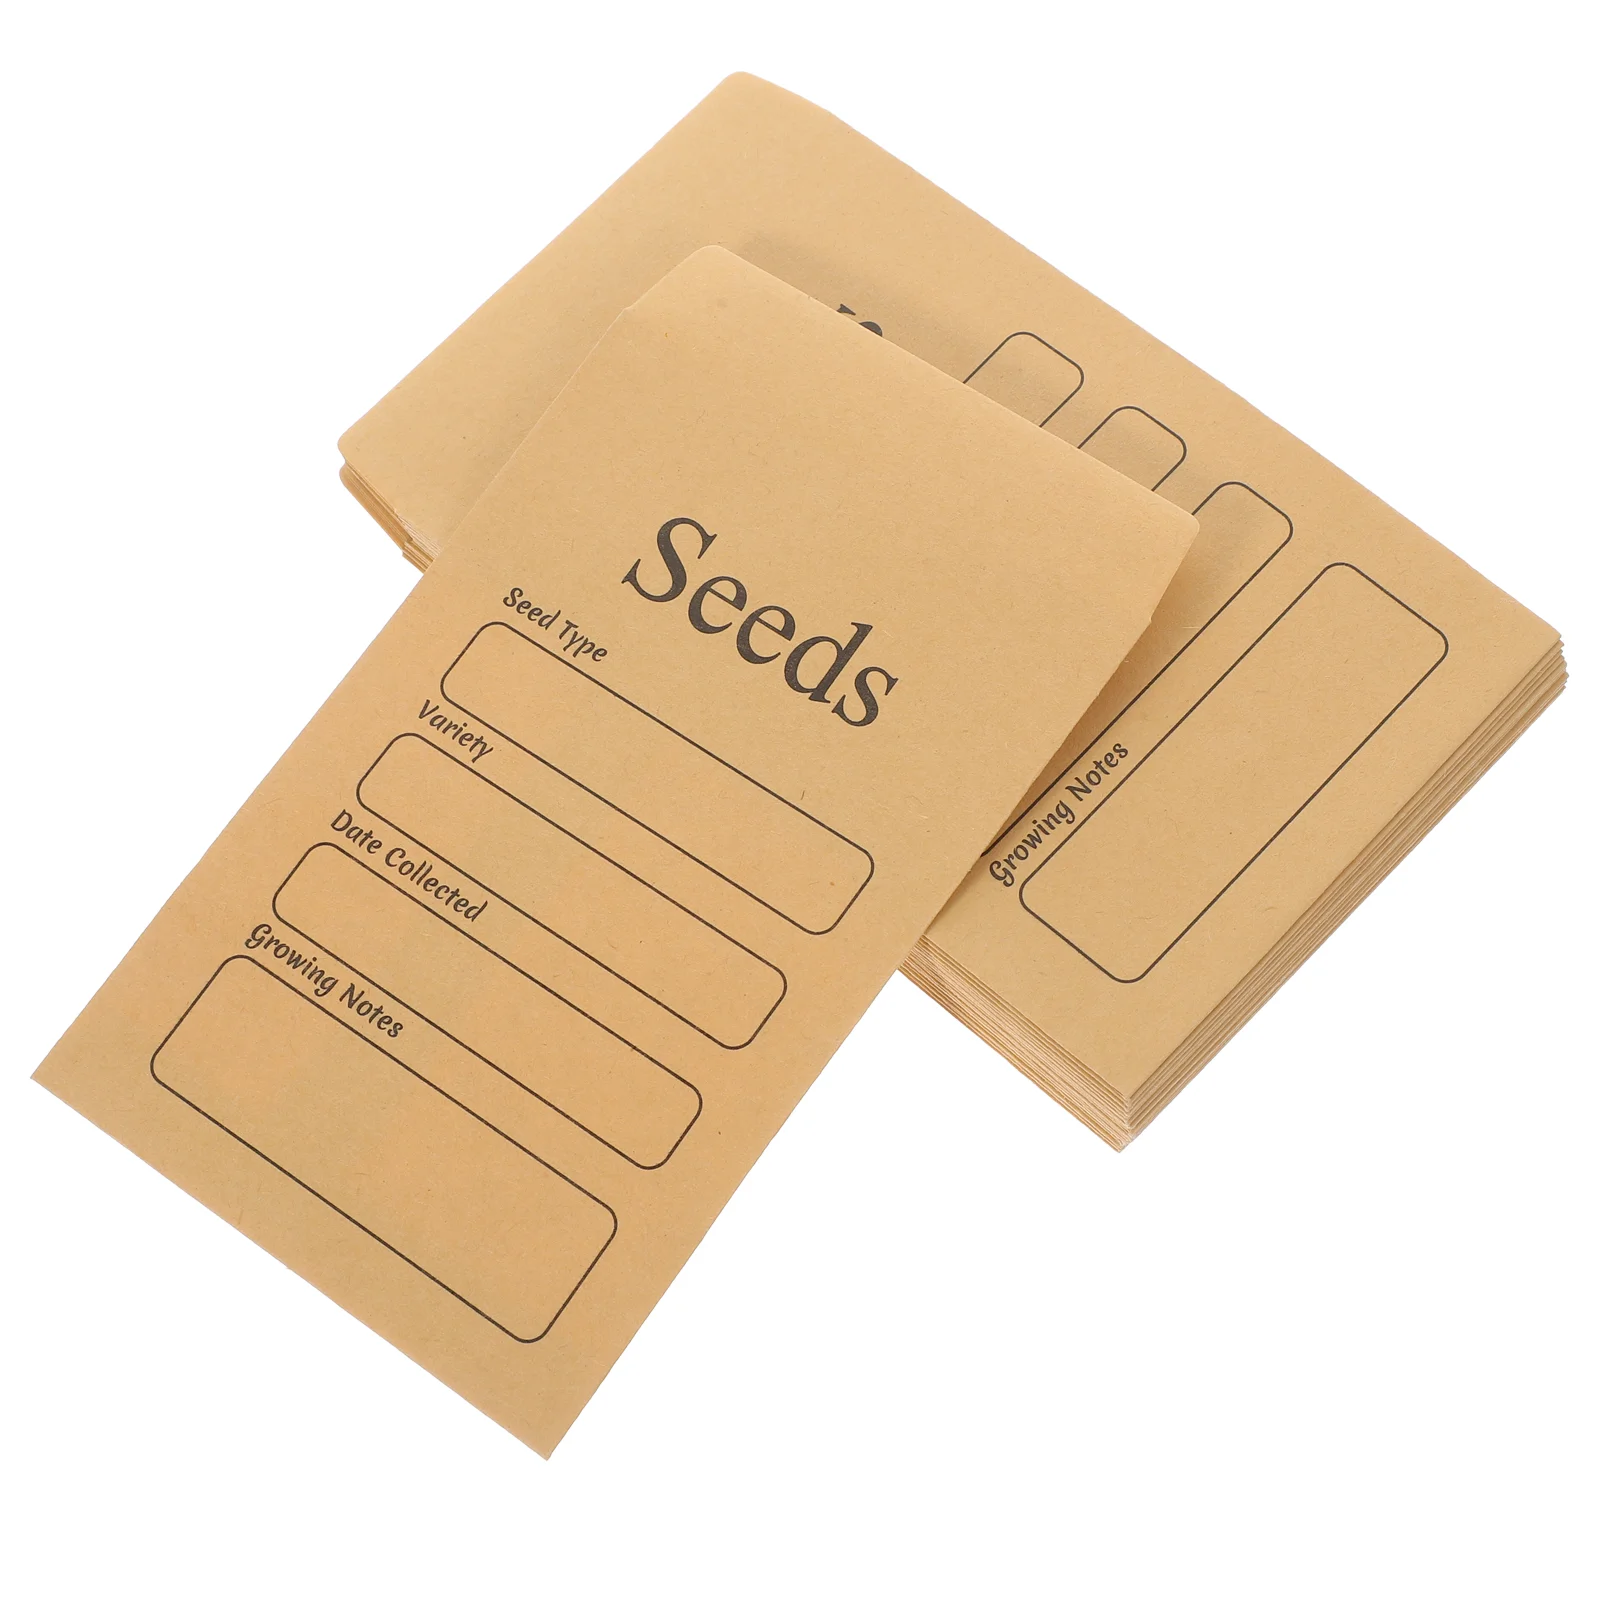 

50 Pcs Coin Envelope Wage Envelopes Money for Cash Paper Bags Seed Packets Letter Mini